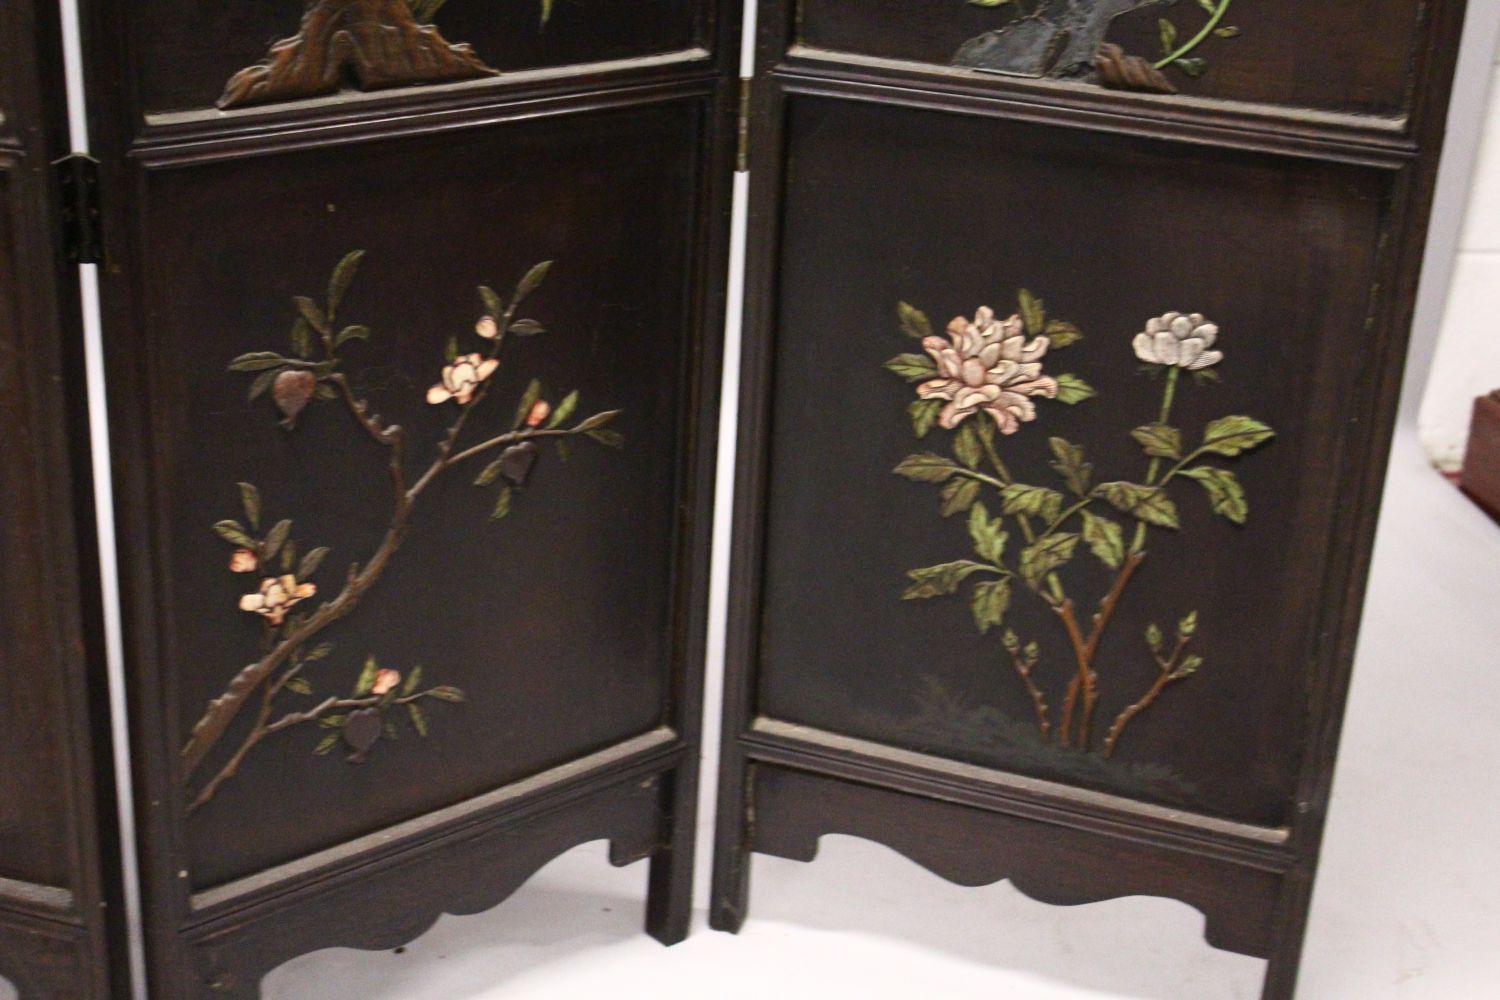 A 19TH CENTURY CHINESE HARDWOOD AND INLAID FOUR FOLD SCREEN, each panel inlaid with carved bone - Image 4 of 9